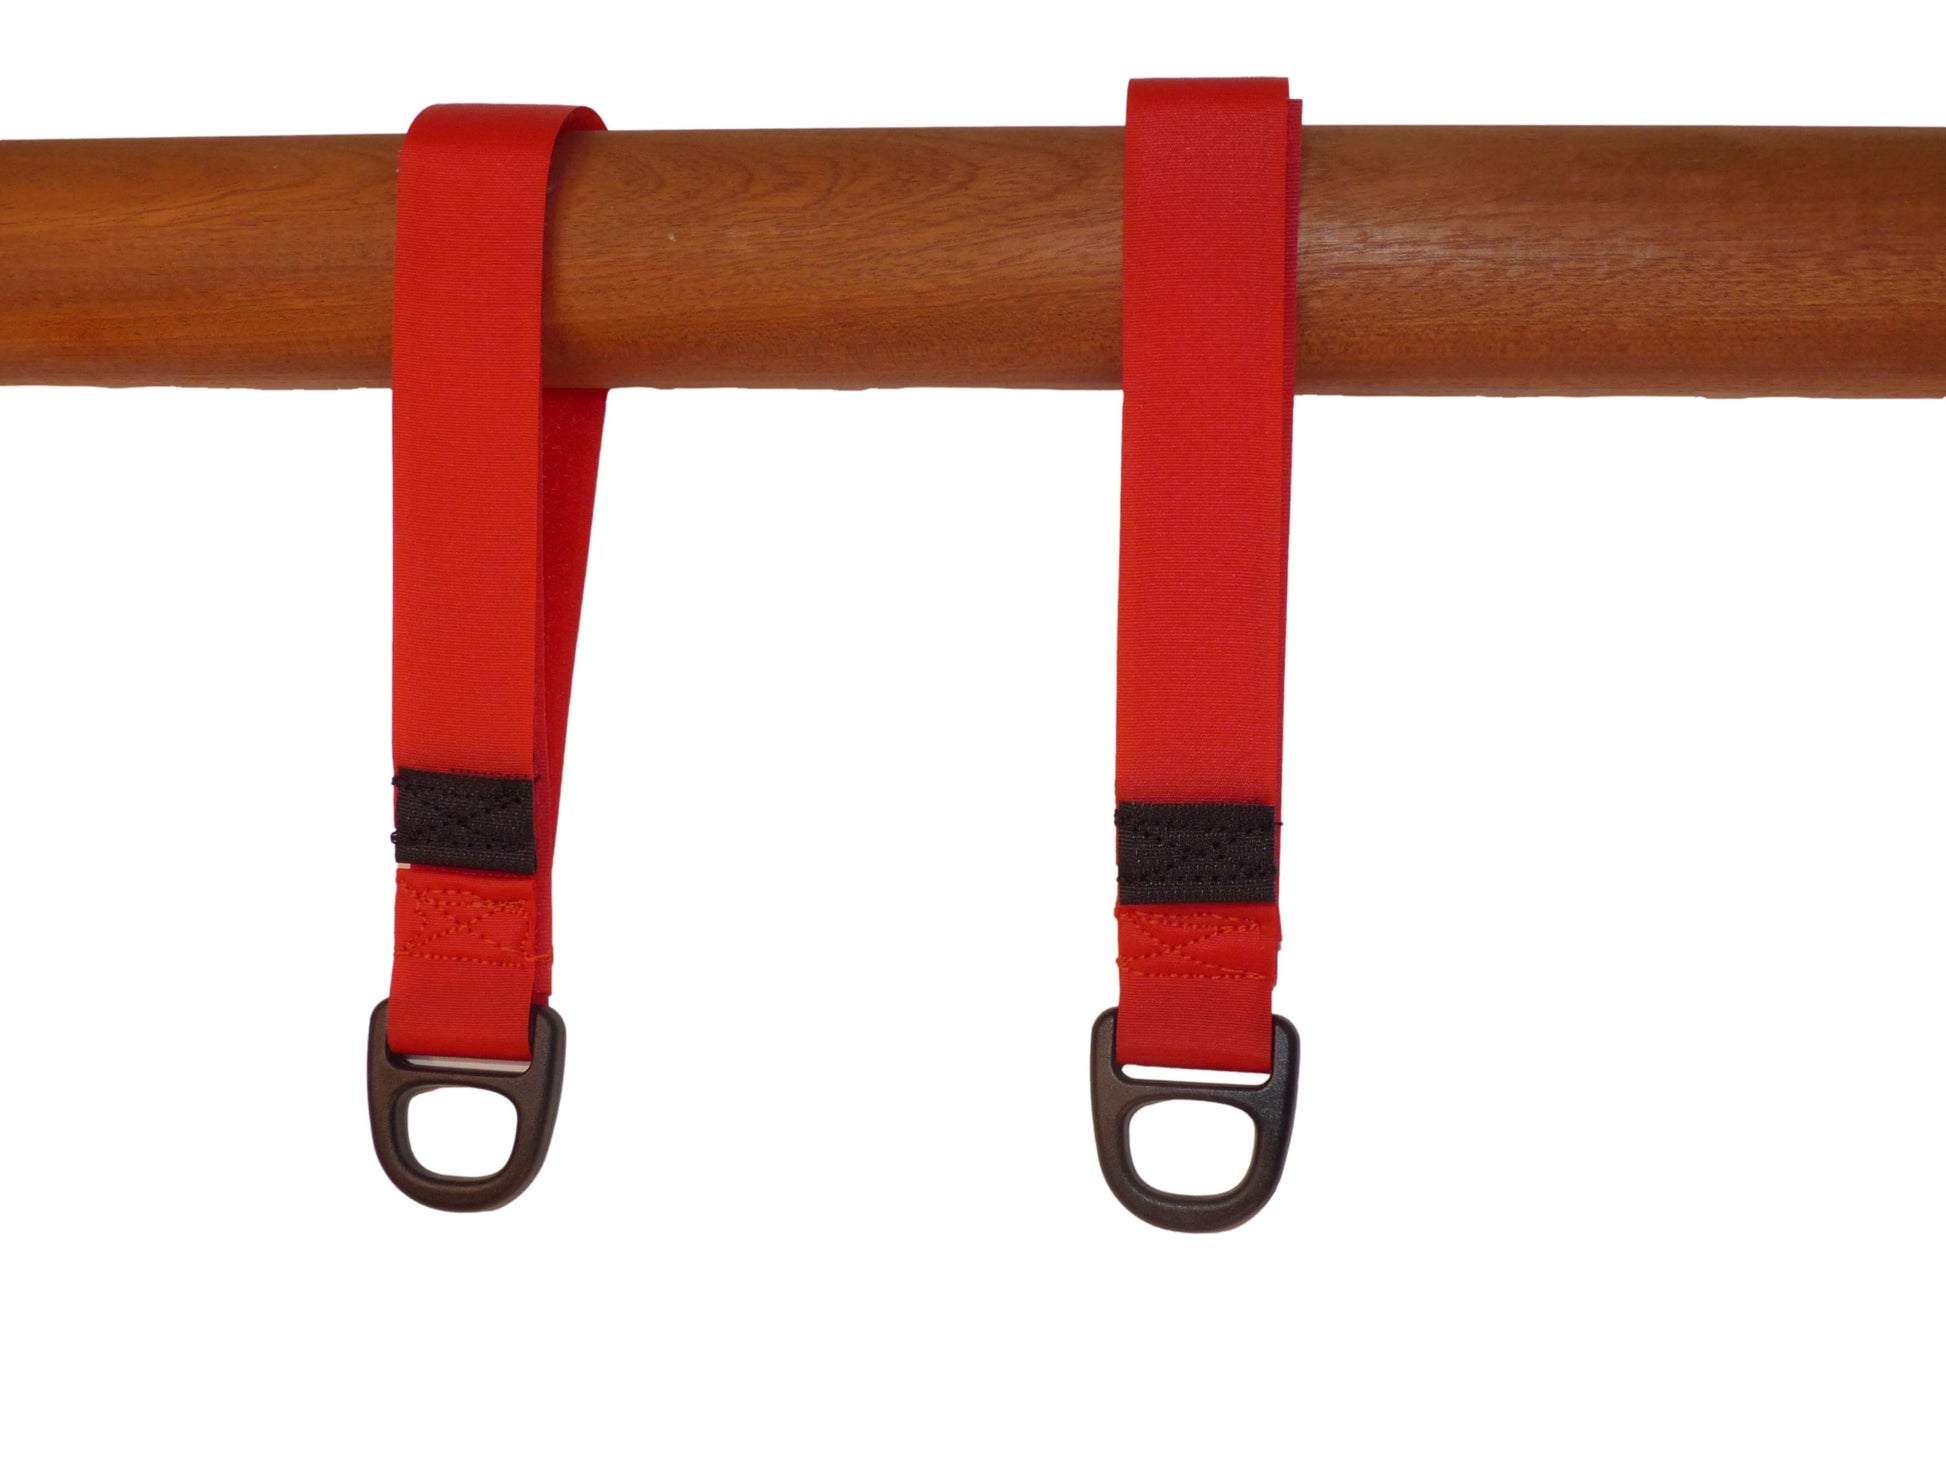 Benristraps 25mm Hook & Loop Tidy & Hang Strap with Plastic Ring (Pack of 2) in red